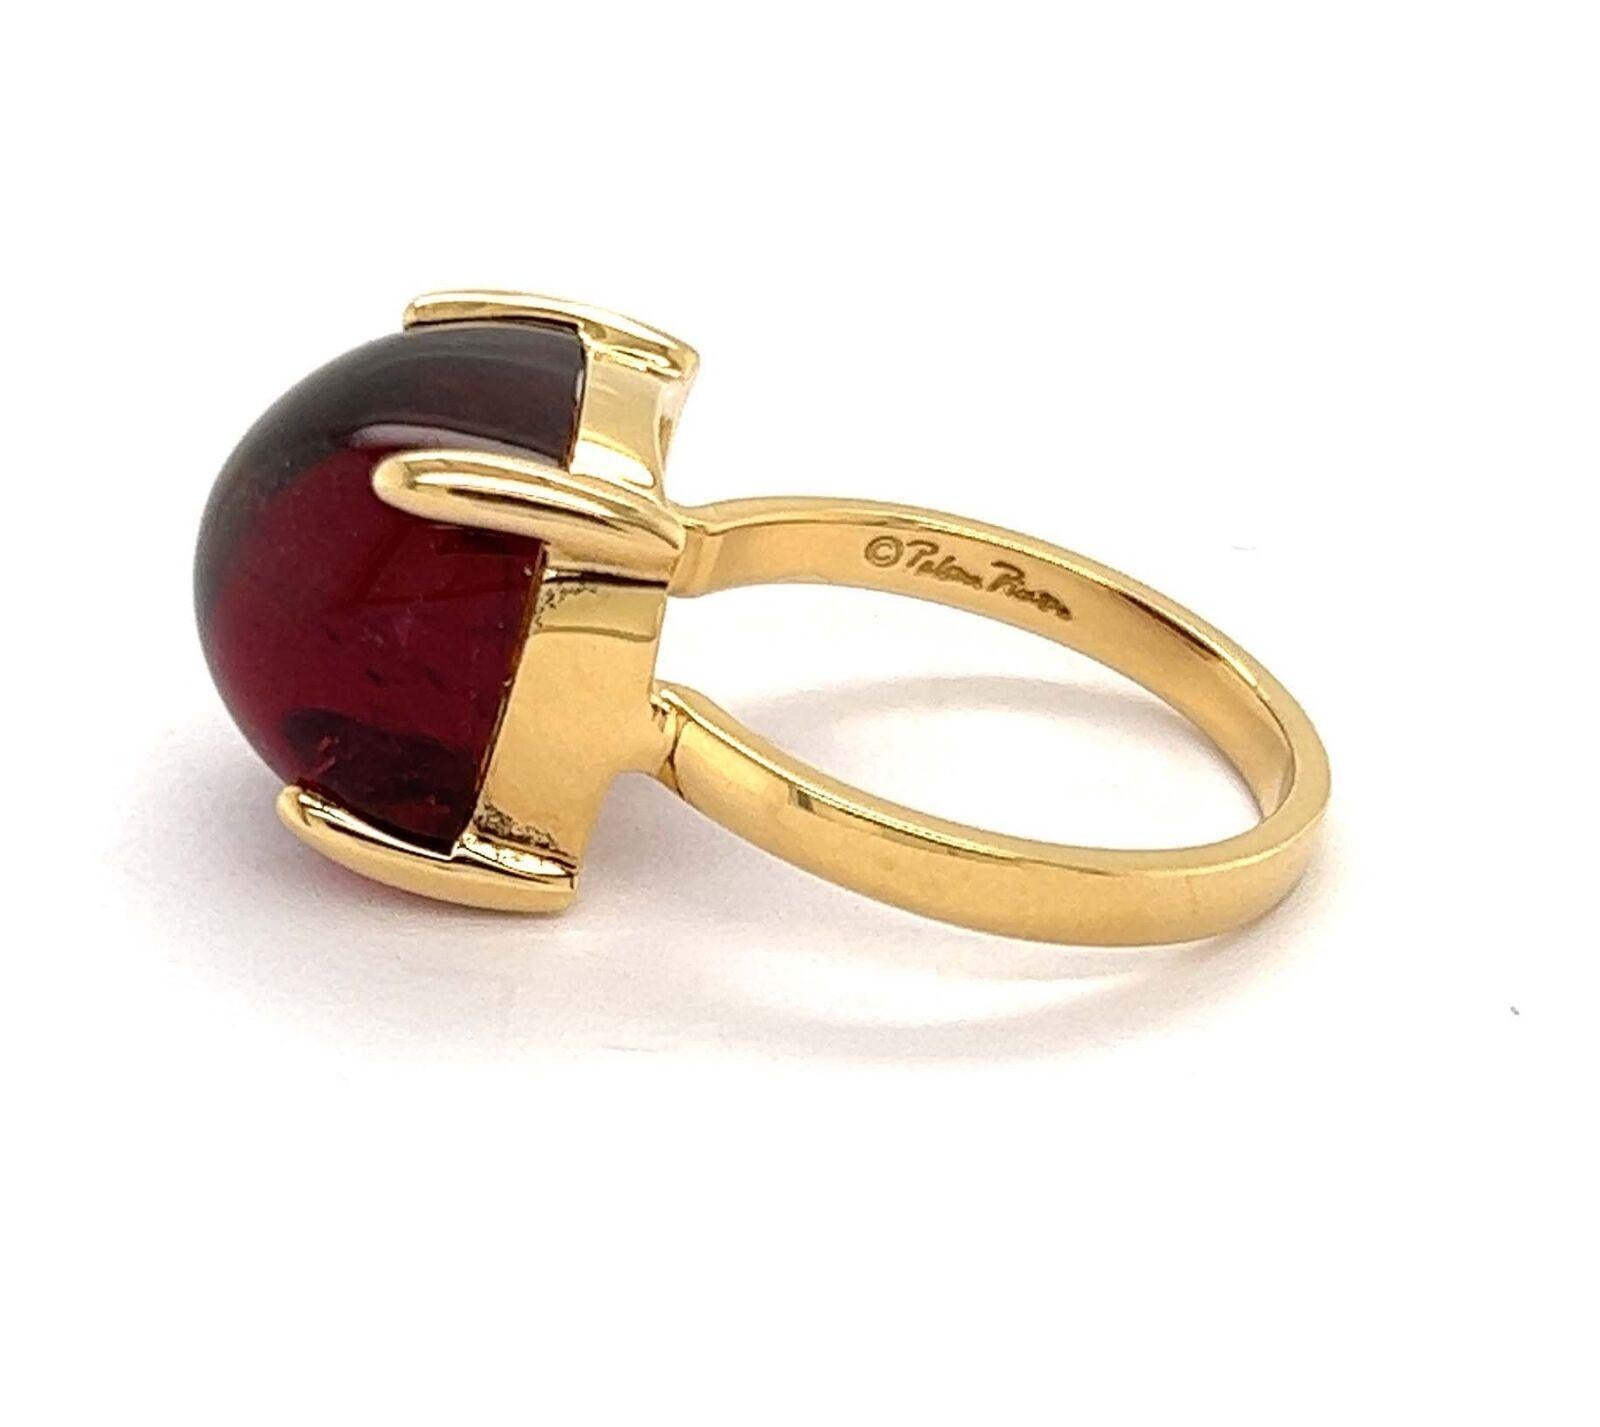 Modern Tiffany & Co. Picasso 18k Yellow Gold Sugar Stacks Rubellite Ring - Size 7